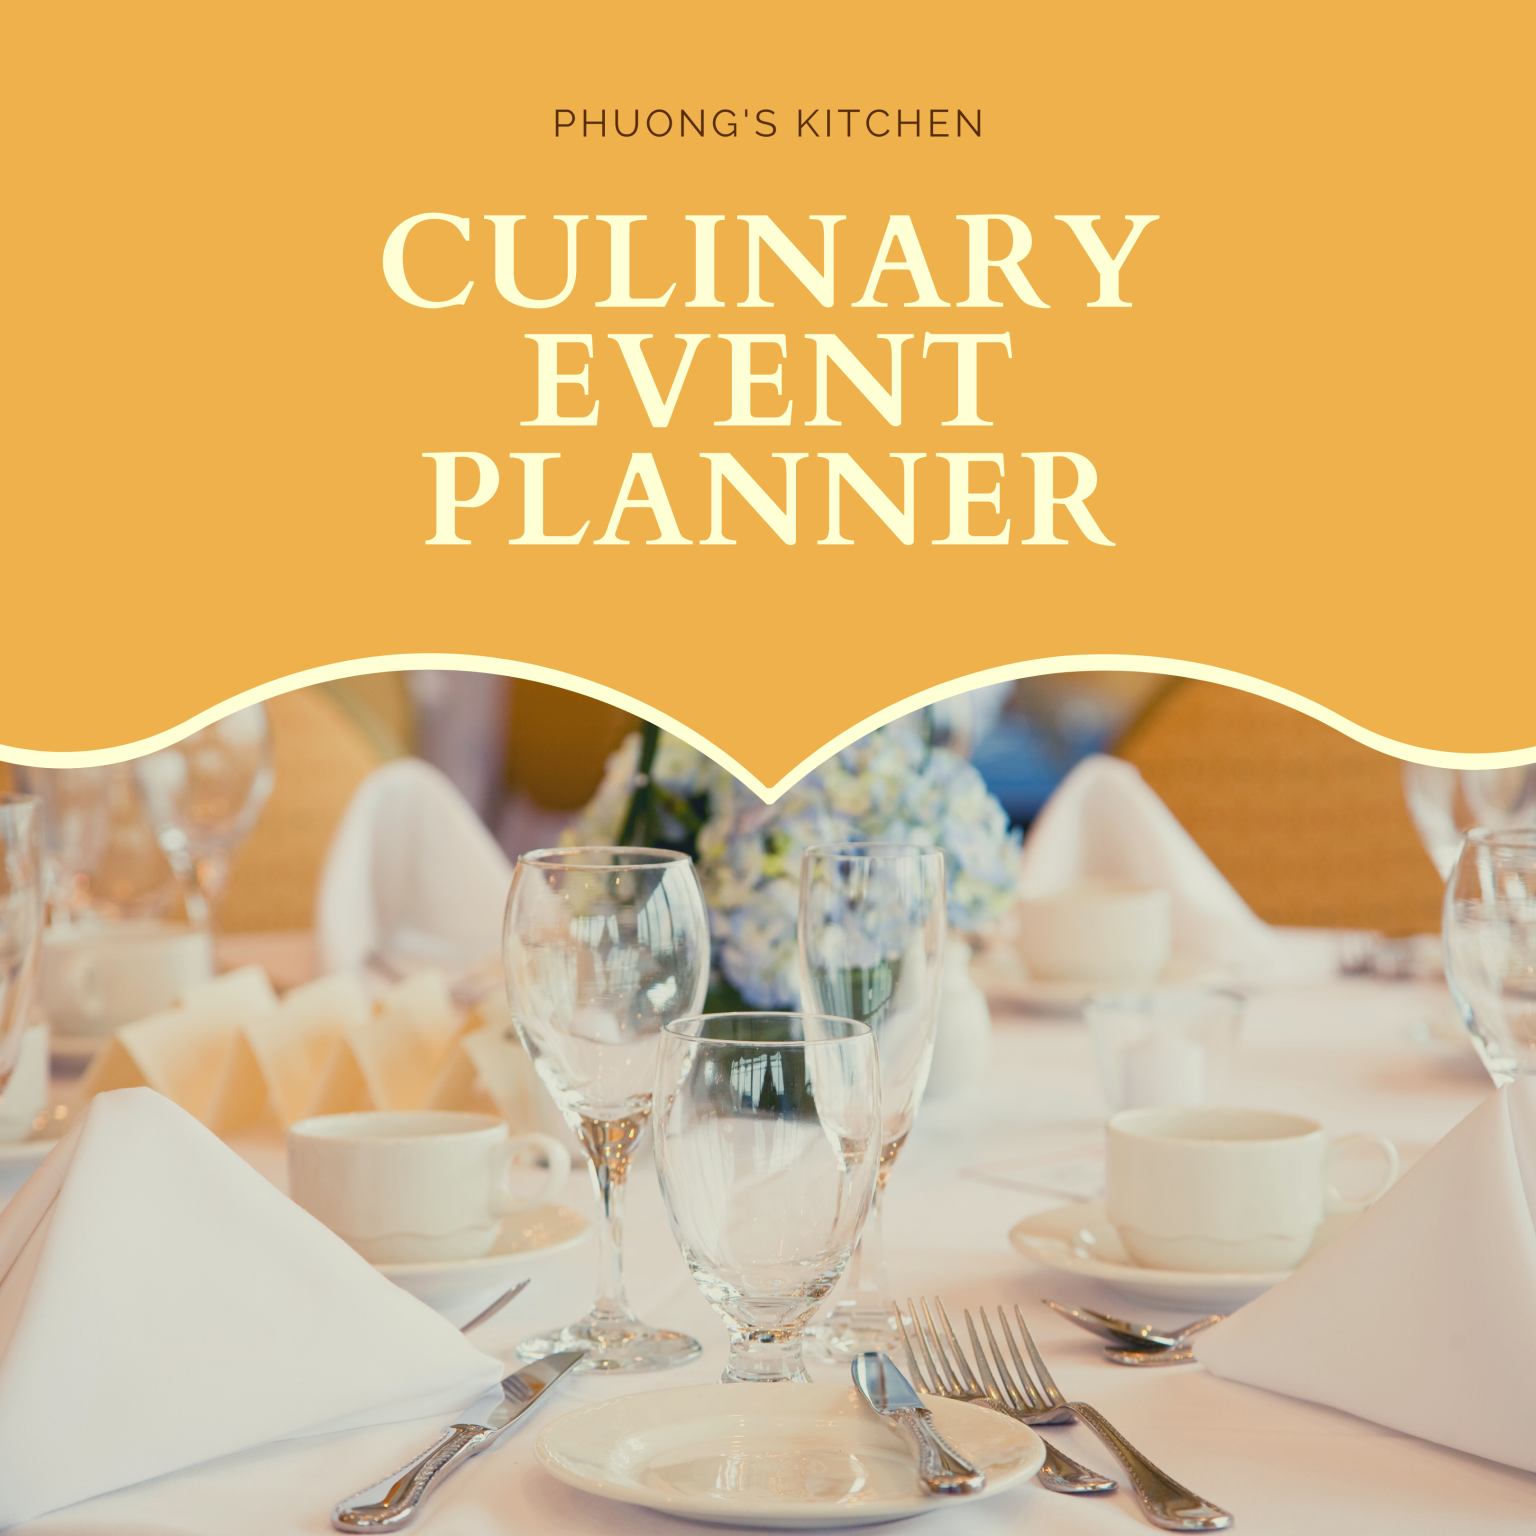 Culinary event planner Phuong's Kitchen